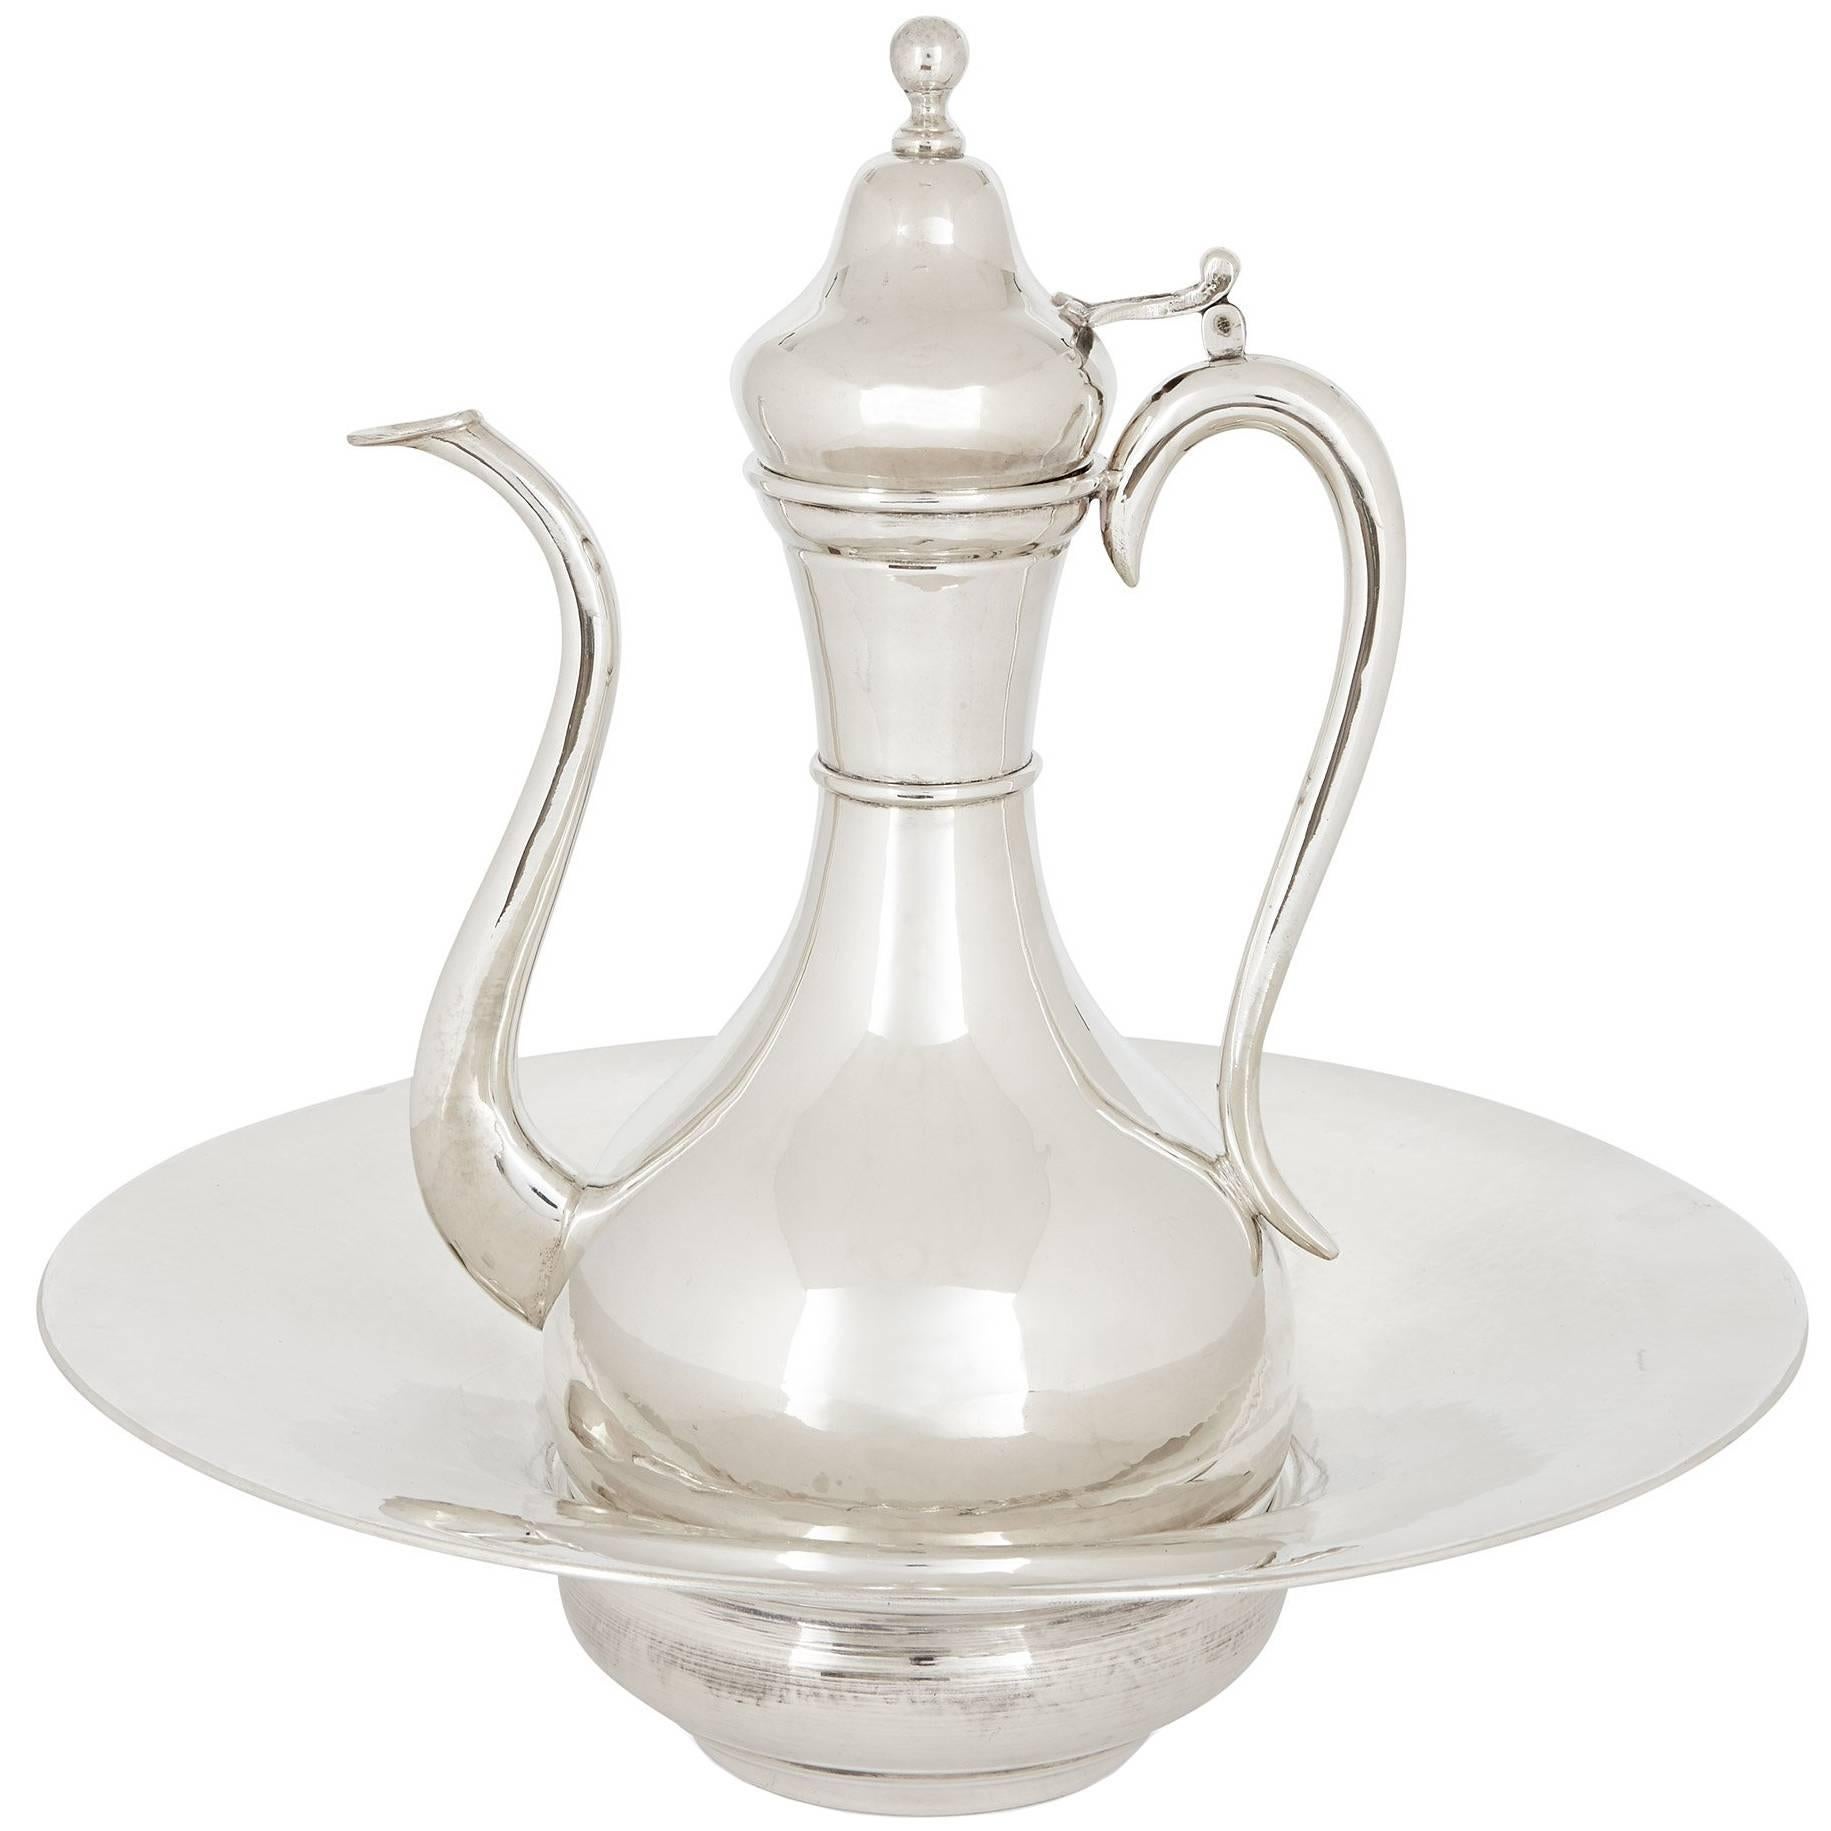 Ottoman Style Silver Ewer and Basin